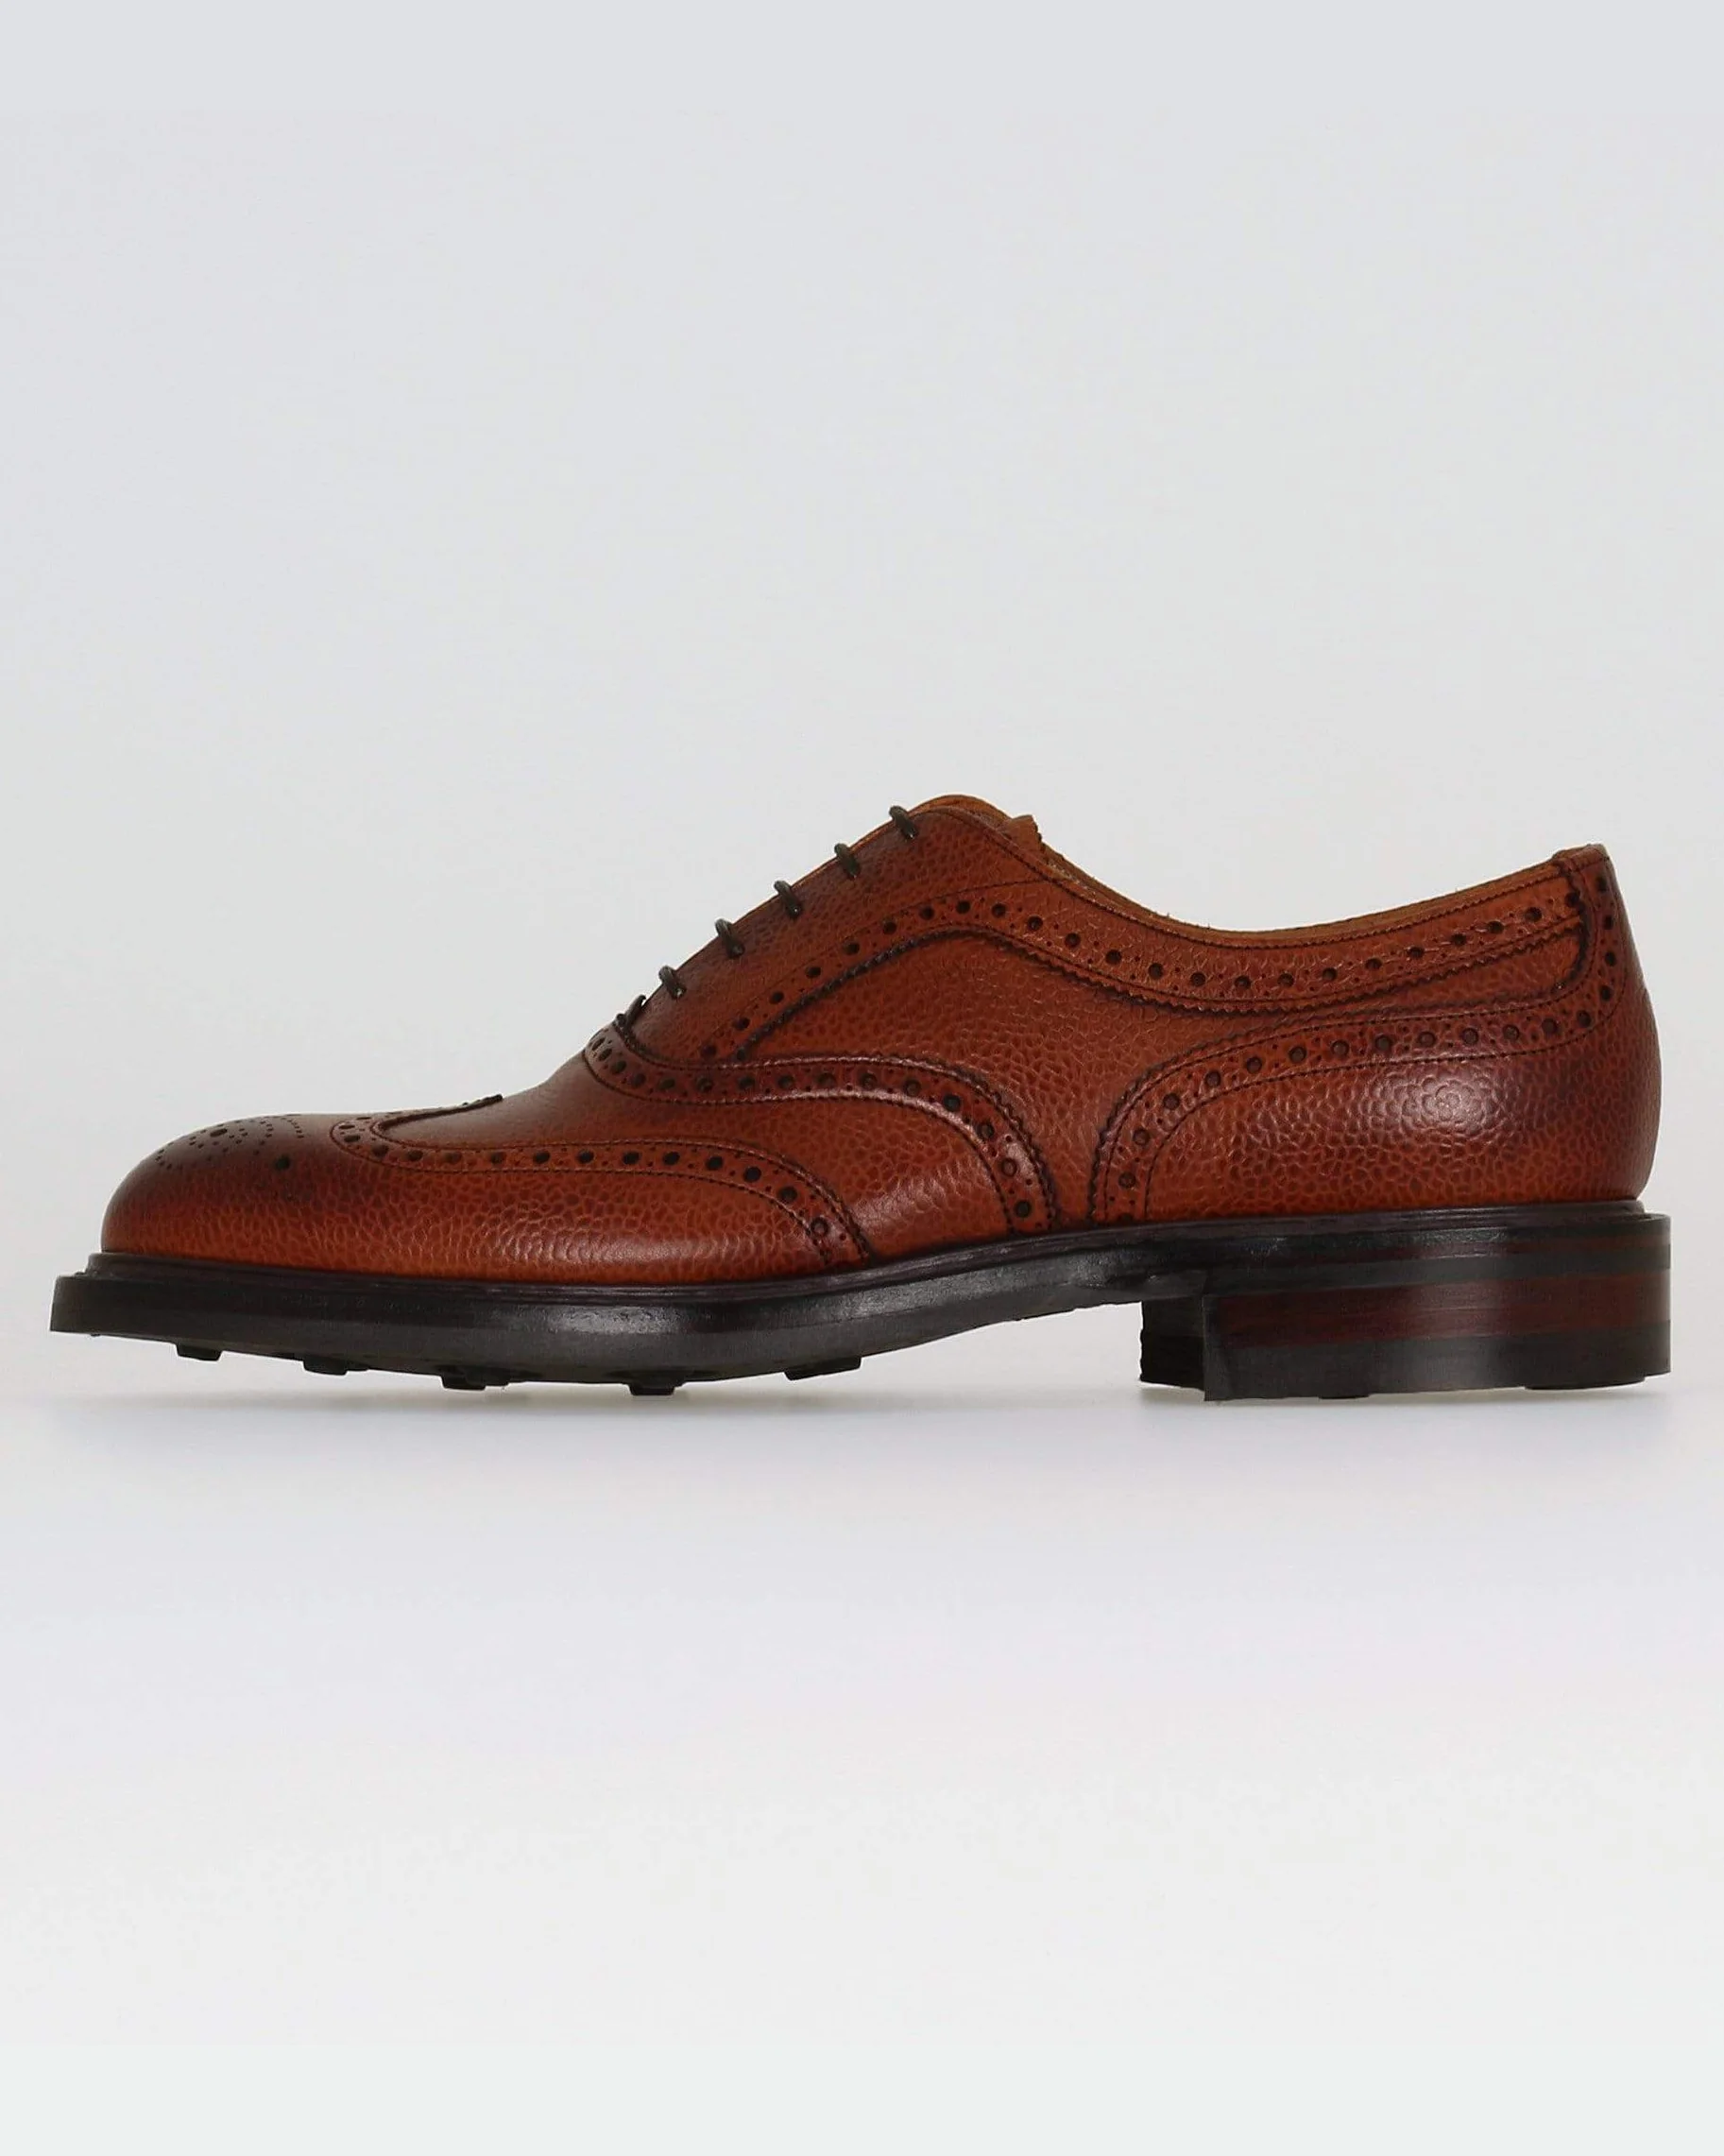 cheaney oliver